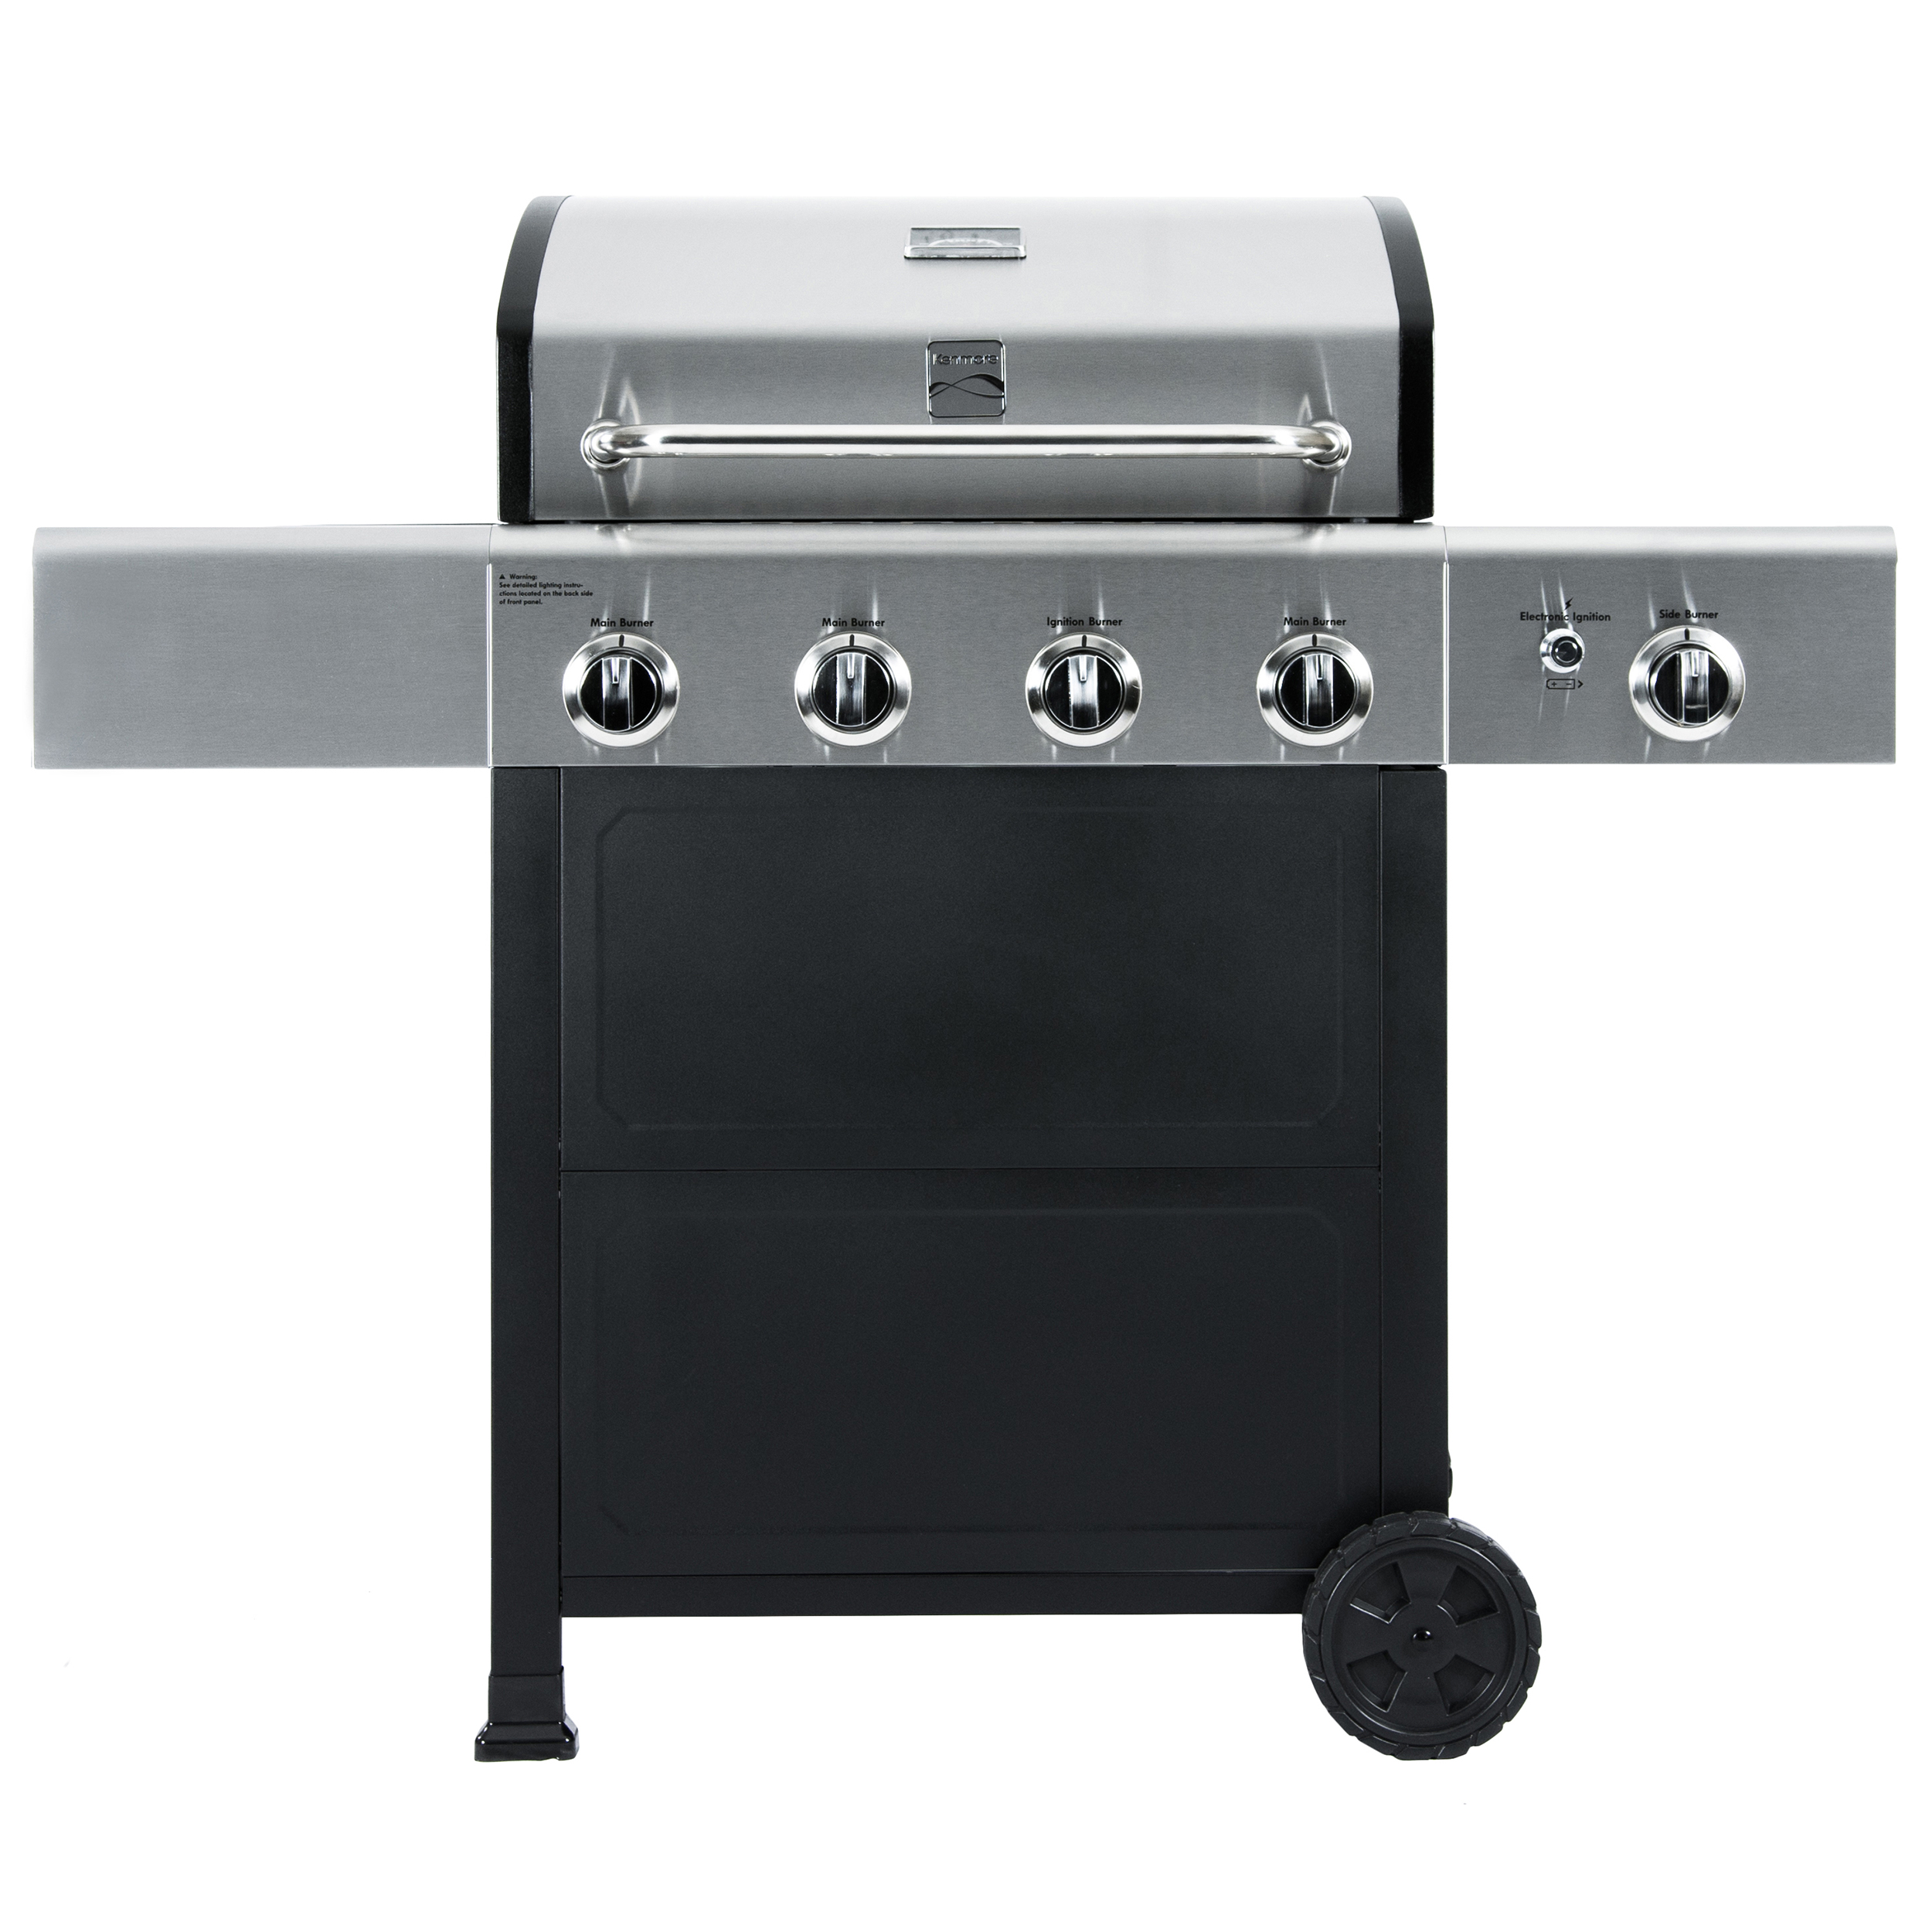 Kenmore 4-Burner Outdoor Propane Gas Grill with Side Burner, Open Cart, Stainless Steel/Black - image 1 of 9